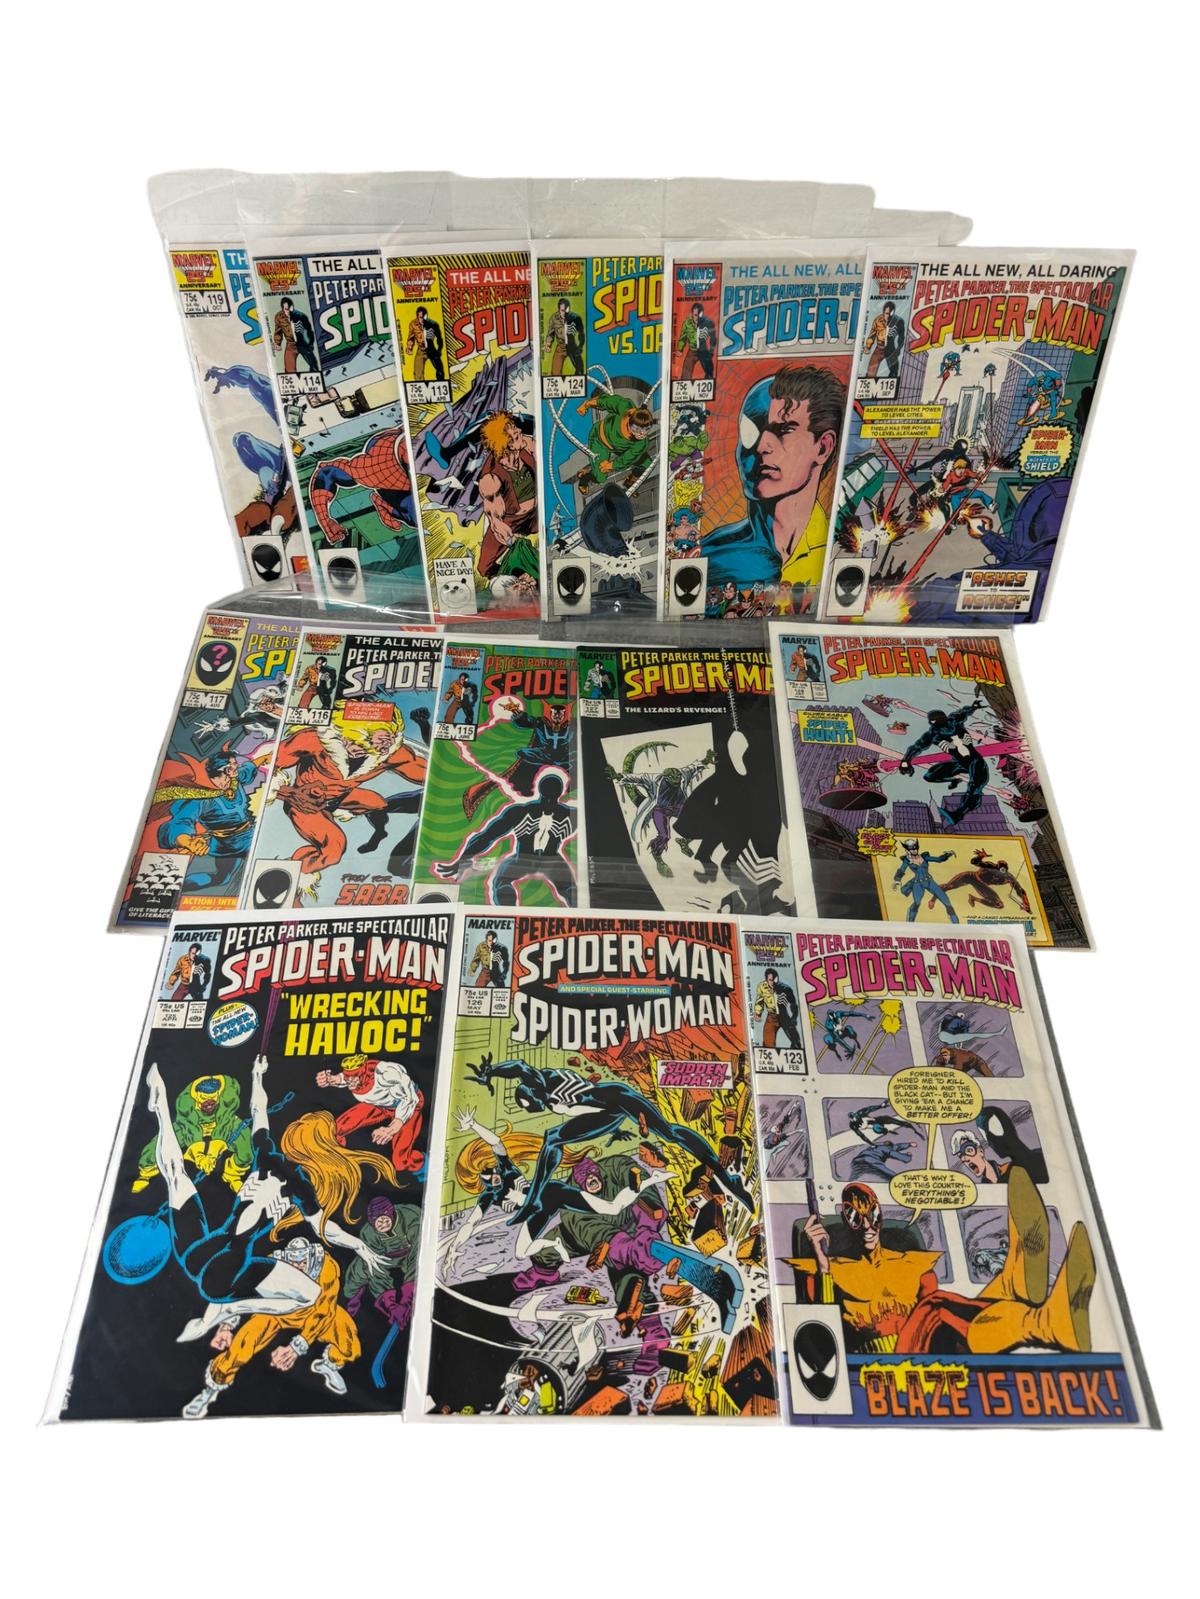 COMIC BOOK SPIDER-MAN COLLECTIONJ LOT